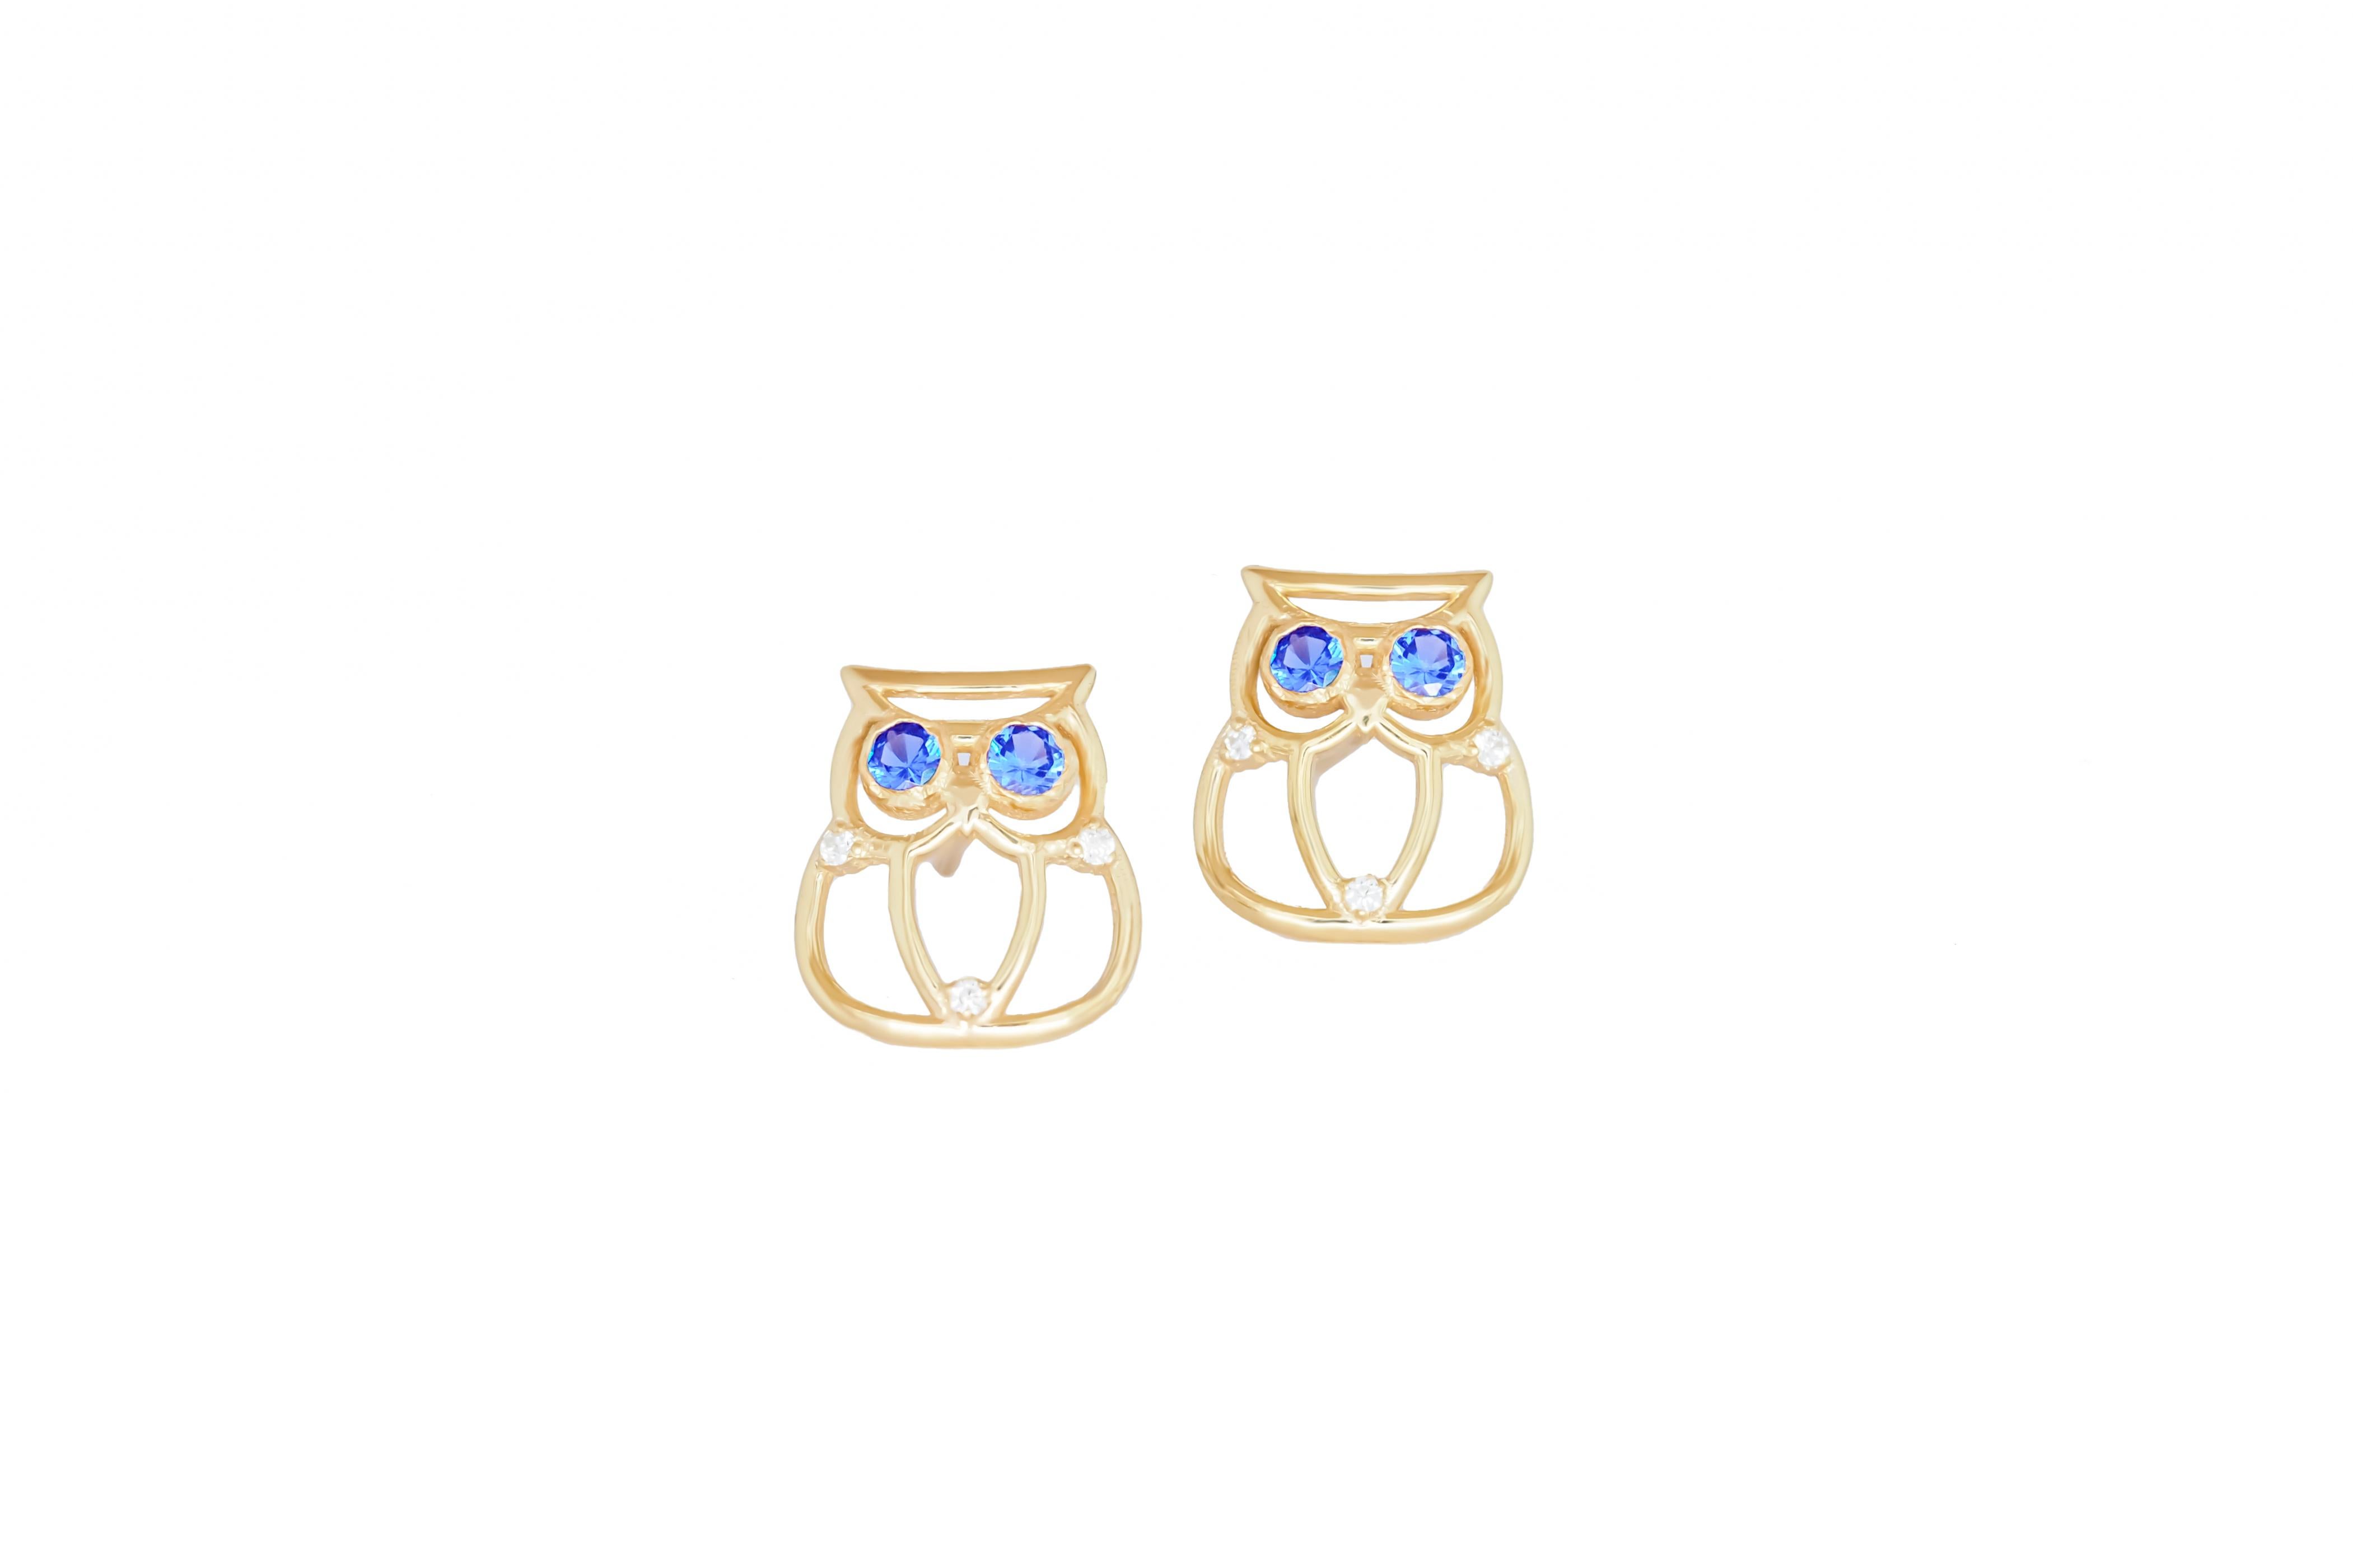 Owl earrings and ring set in 14k gold.  For Sale 1